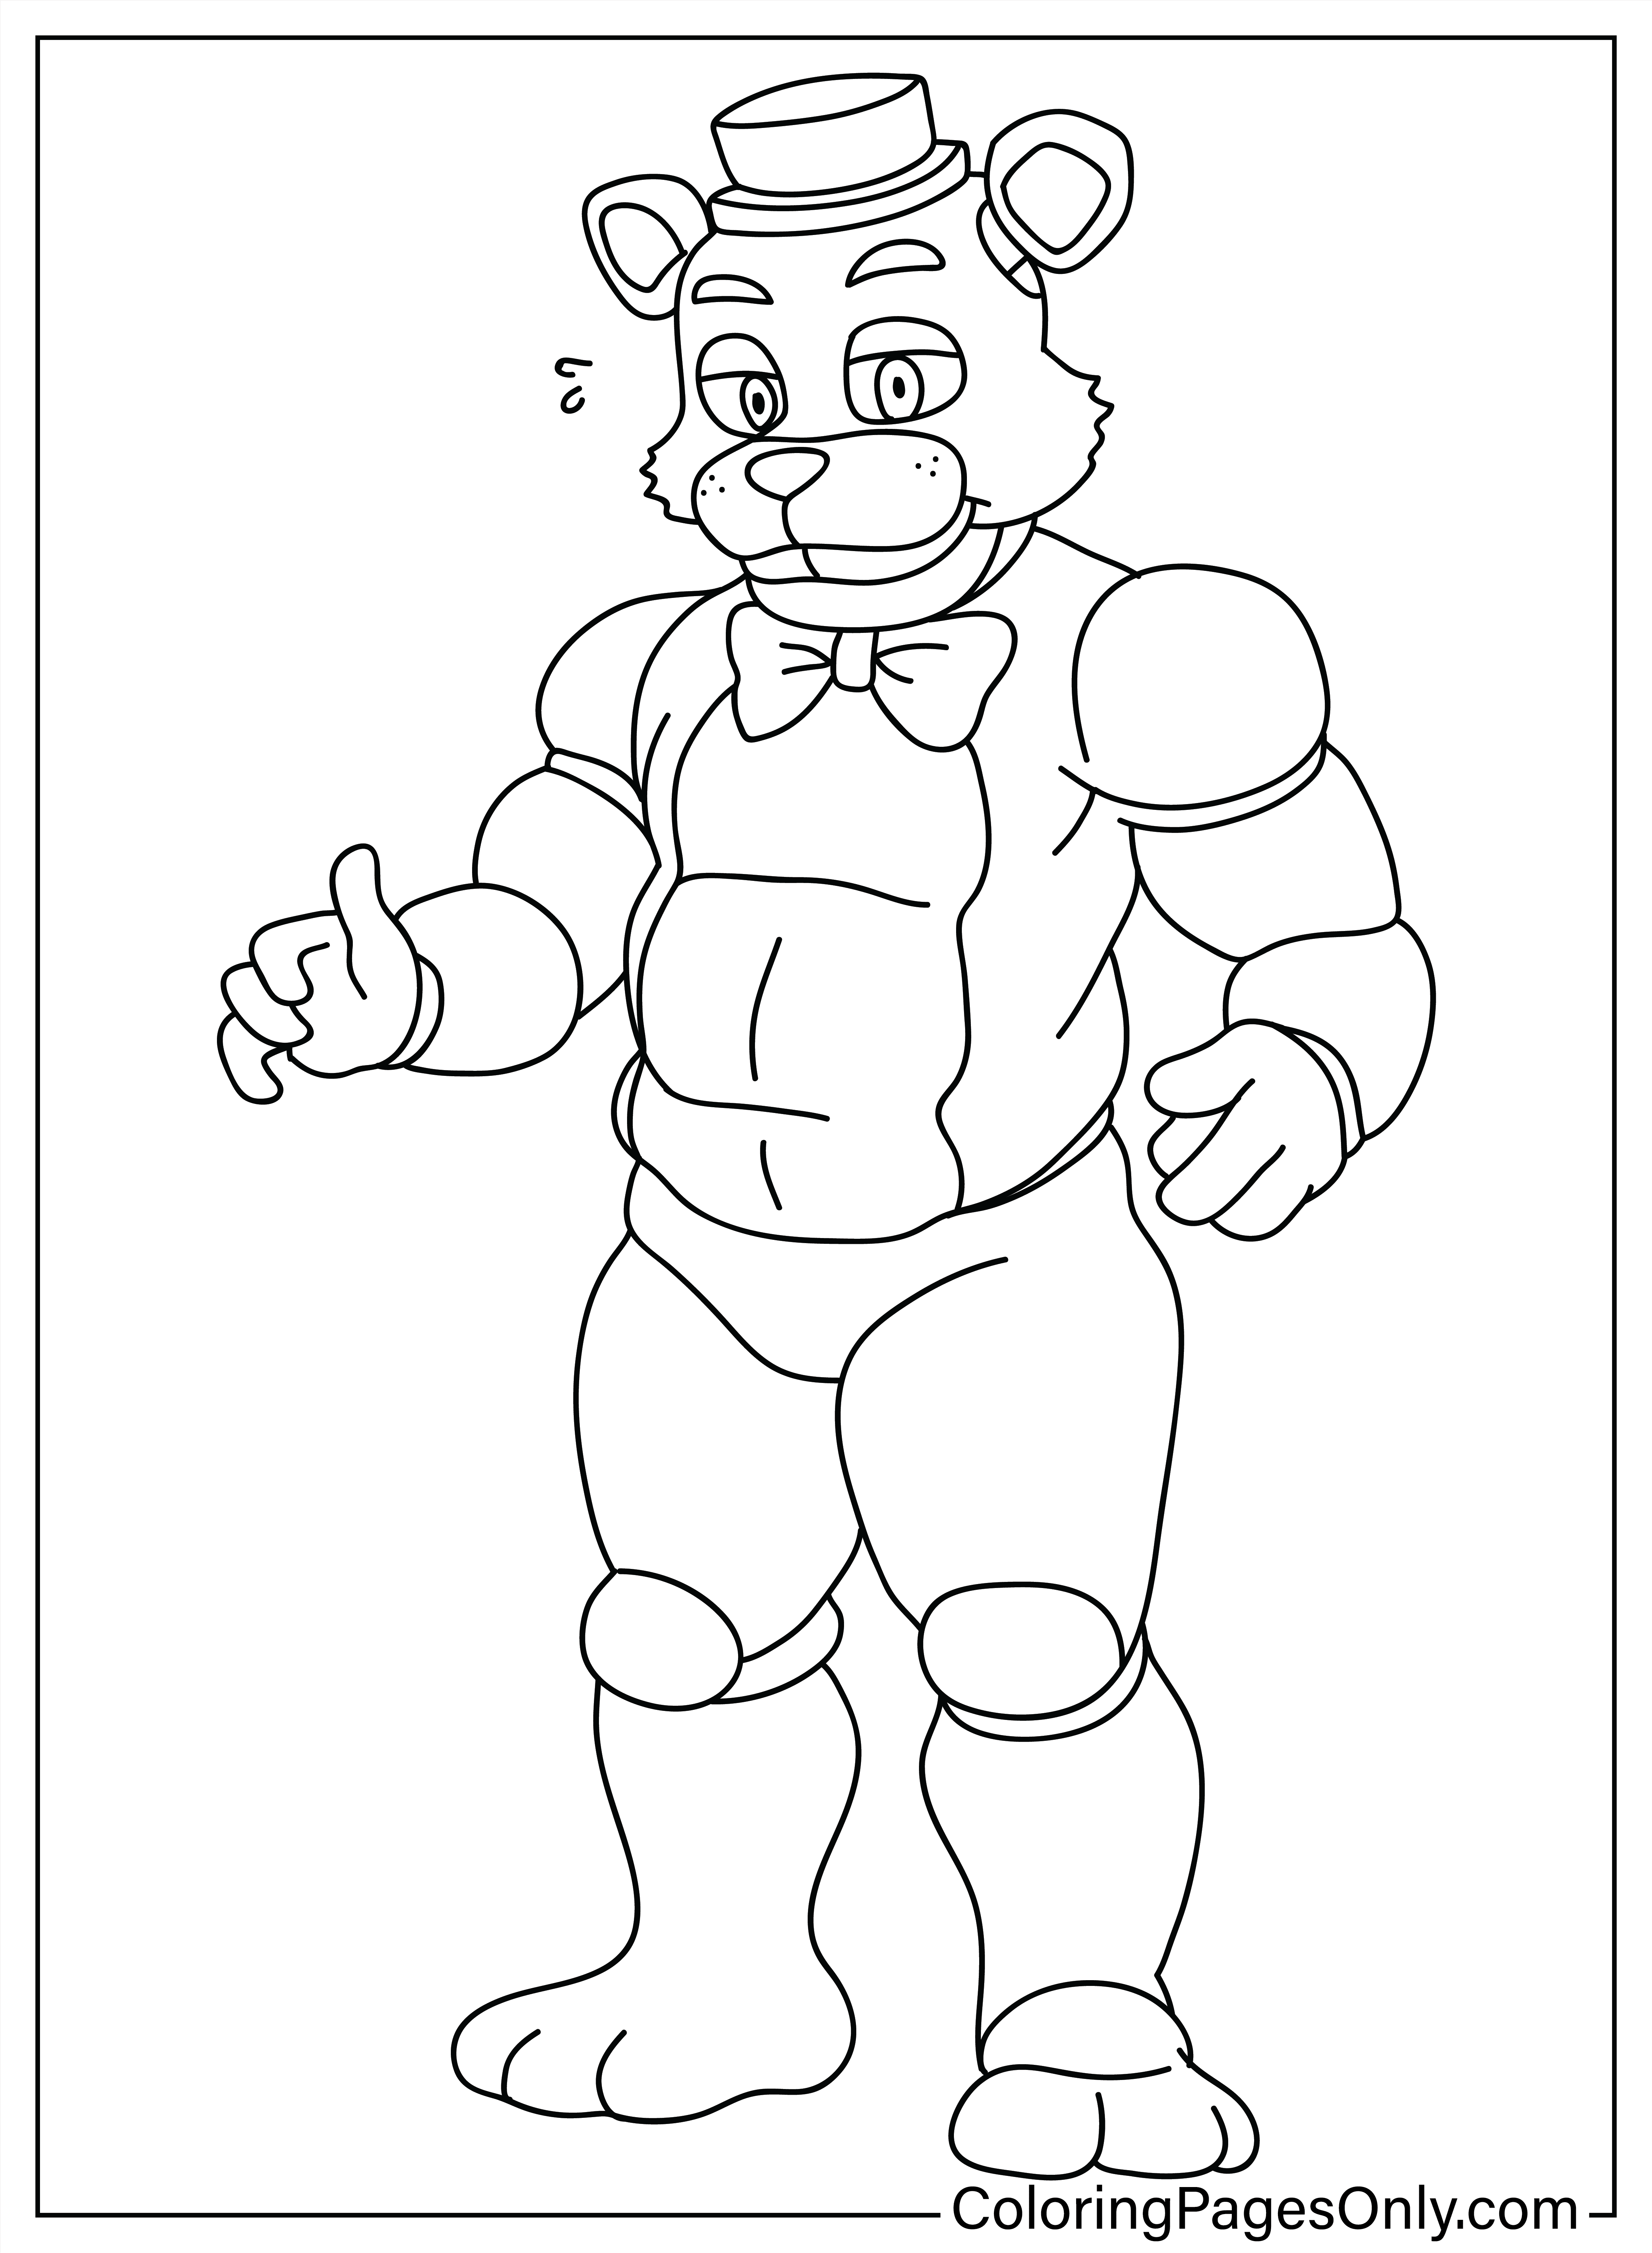 Printable Freddy Fazbear Coloring Page from Five Nights At Freddy's 2